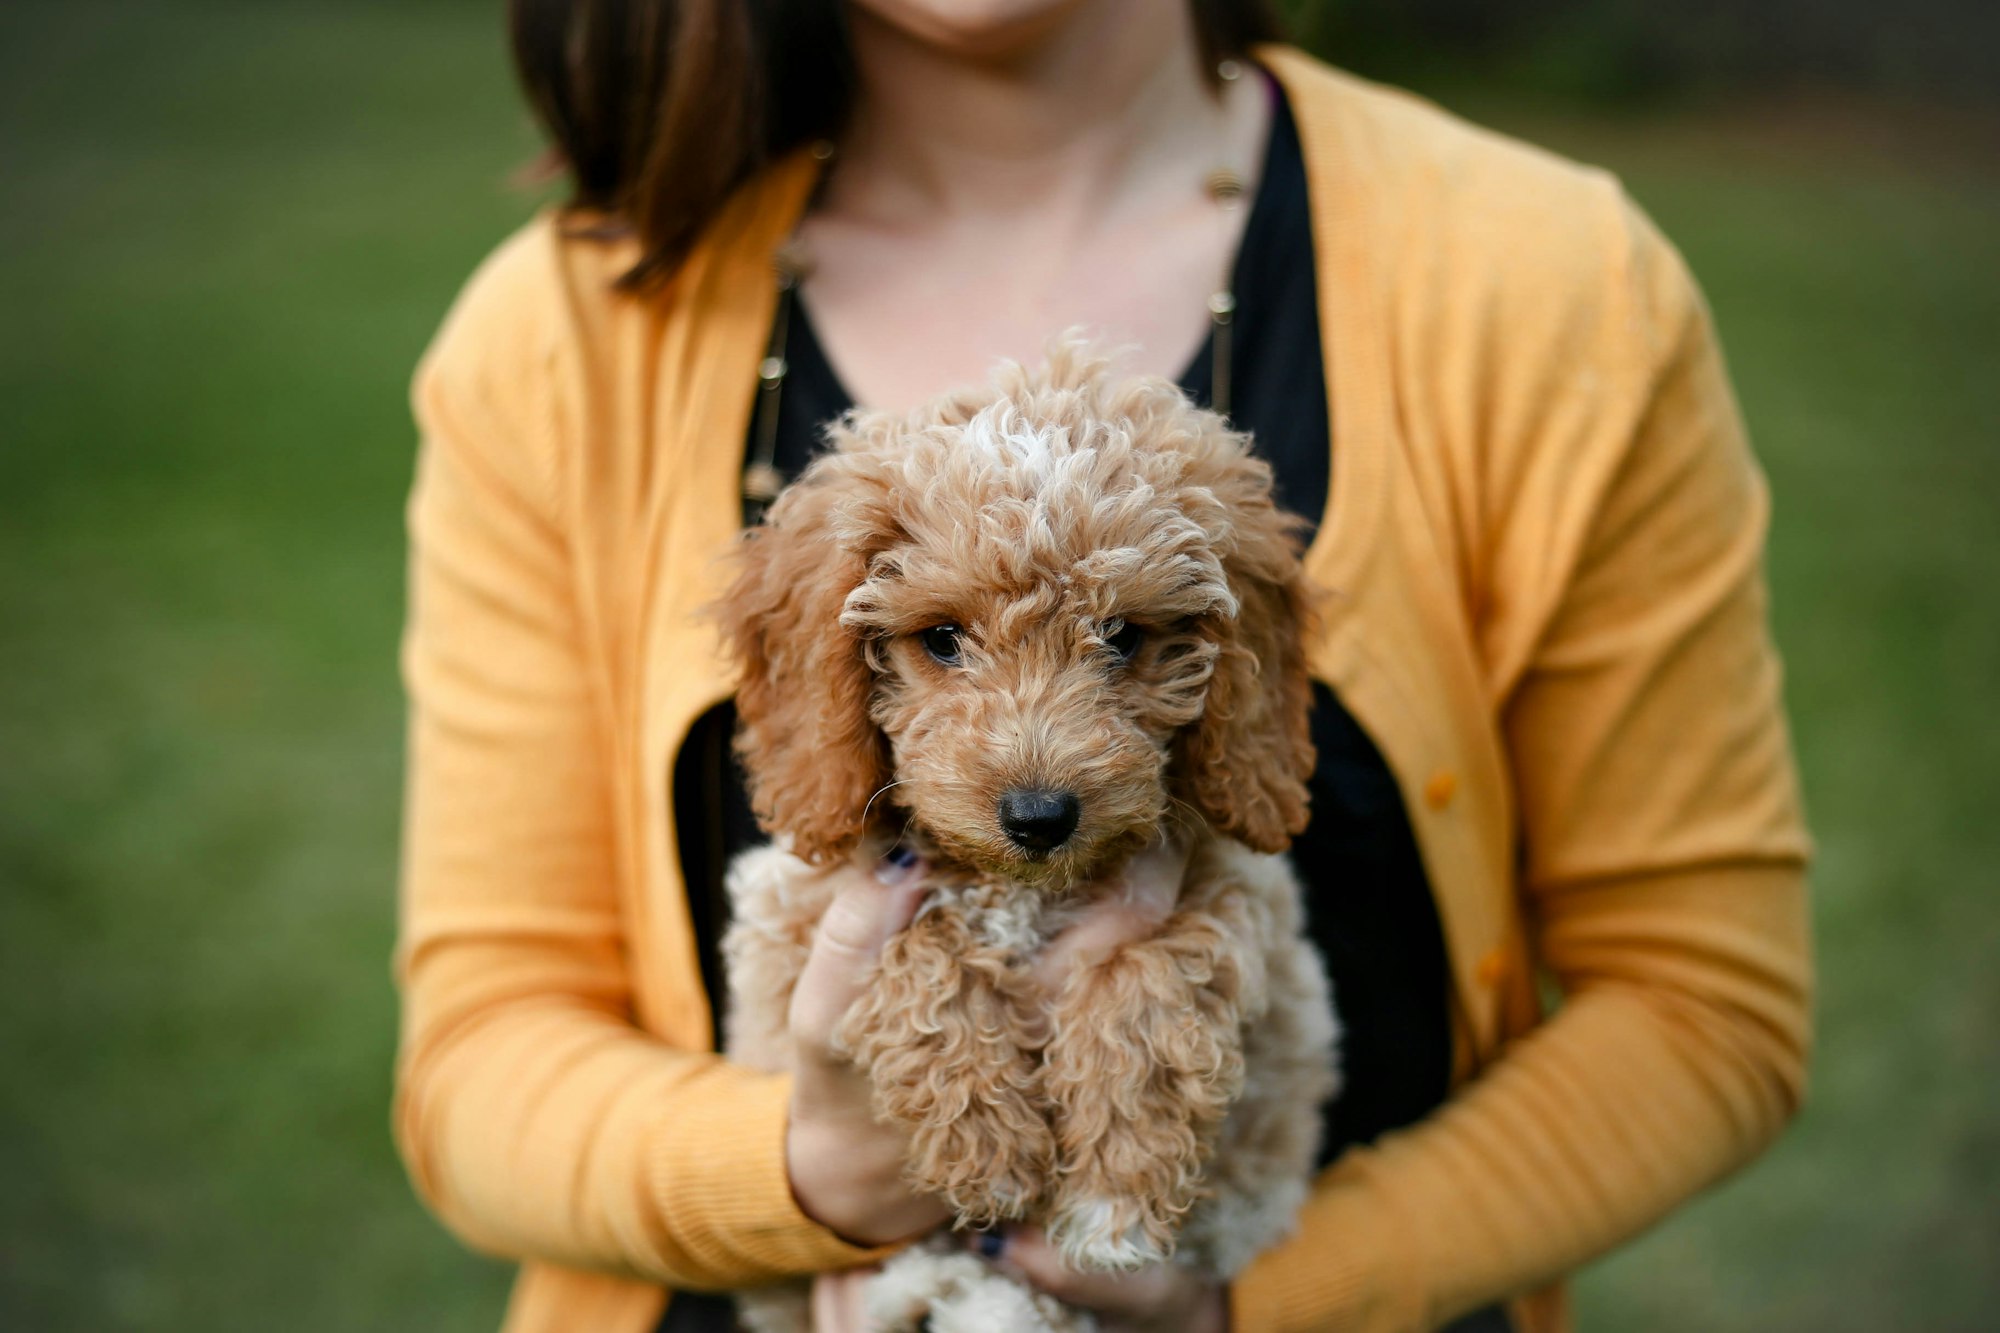 Meet Lainey Lou, the Goldendoodle. I thought this was the perfect “first” picture to upload to Unsplash because this was taken on her first day home with us!